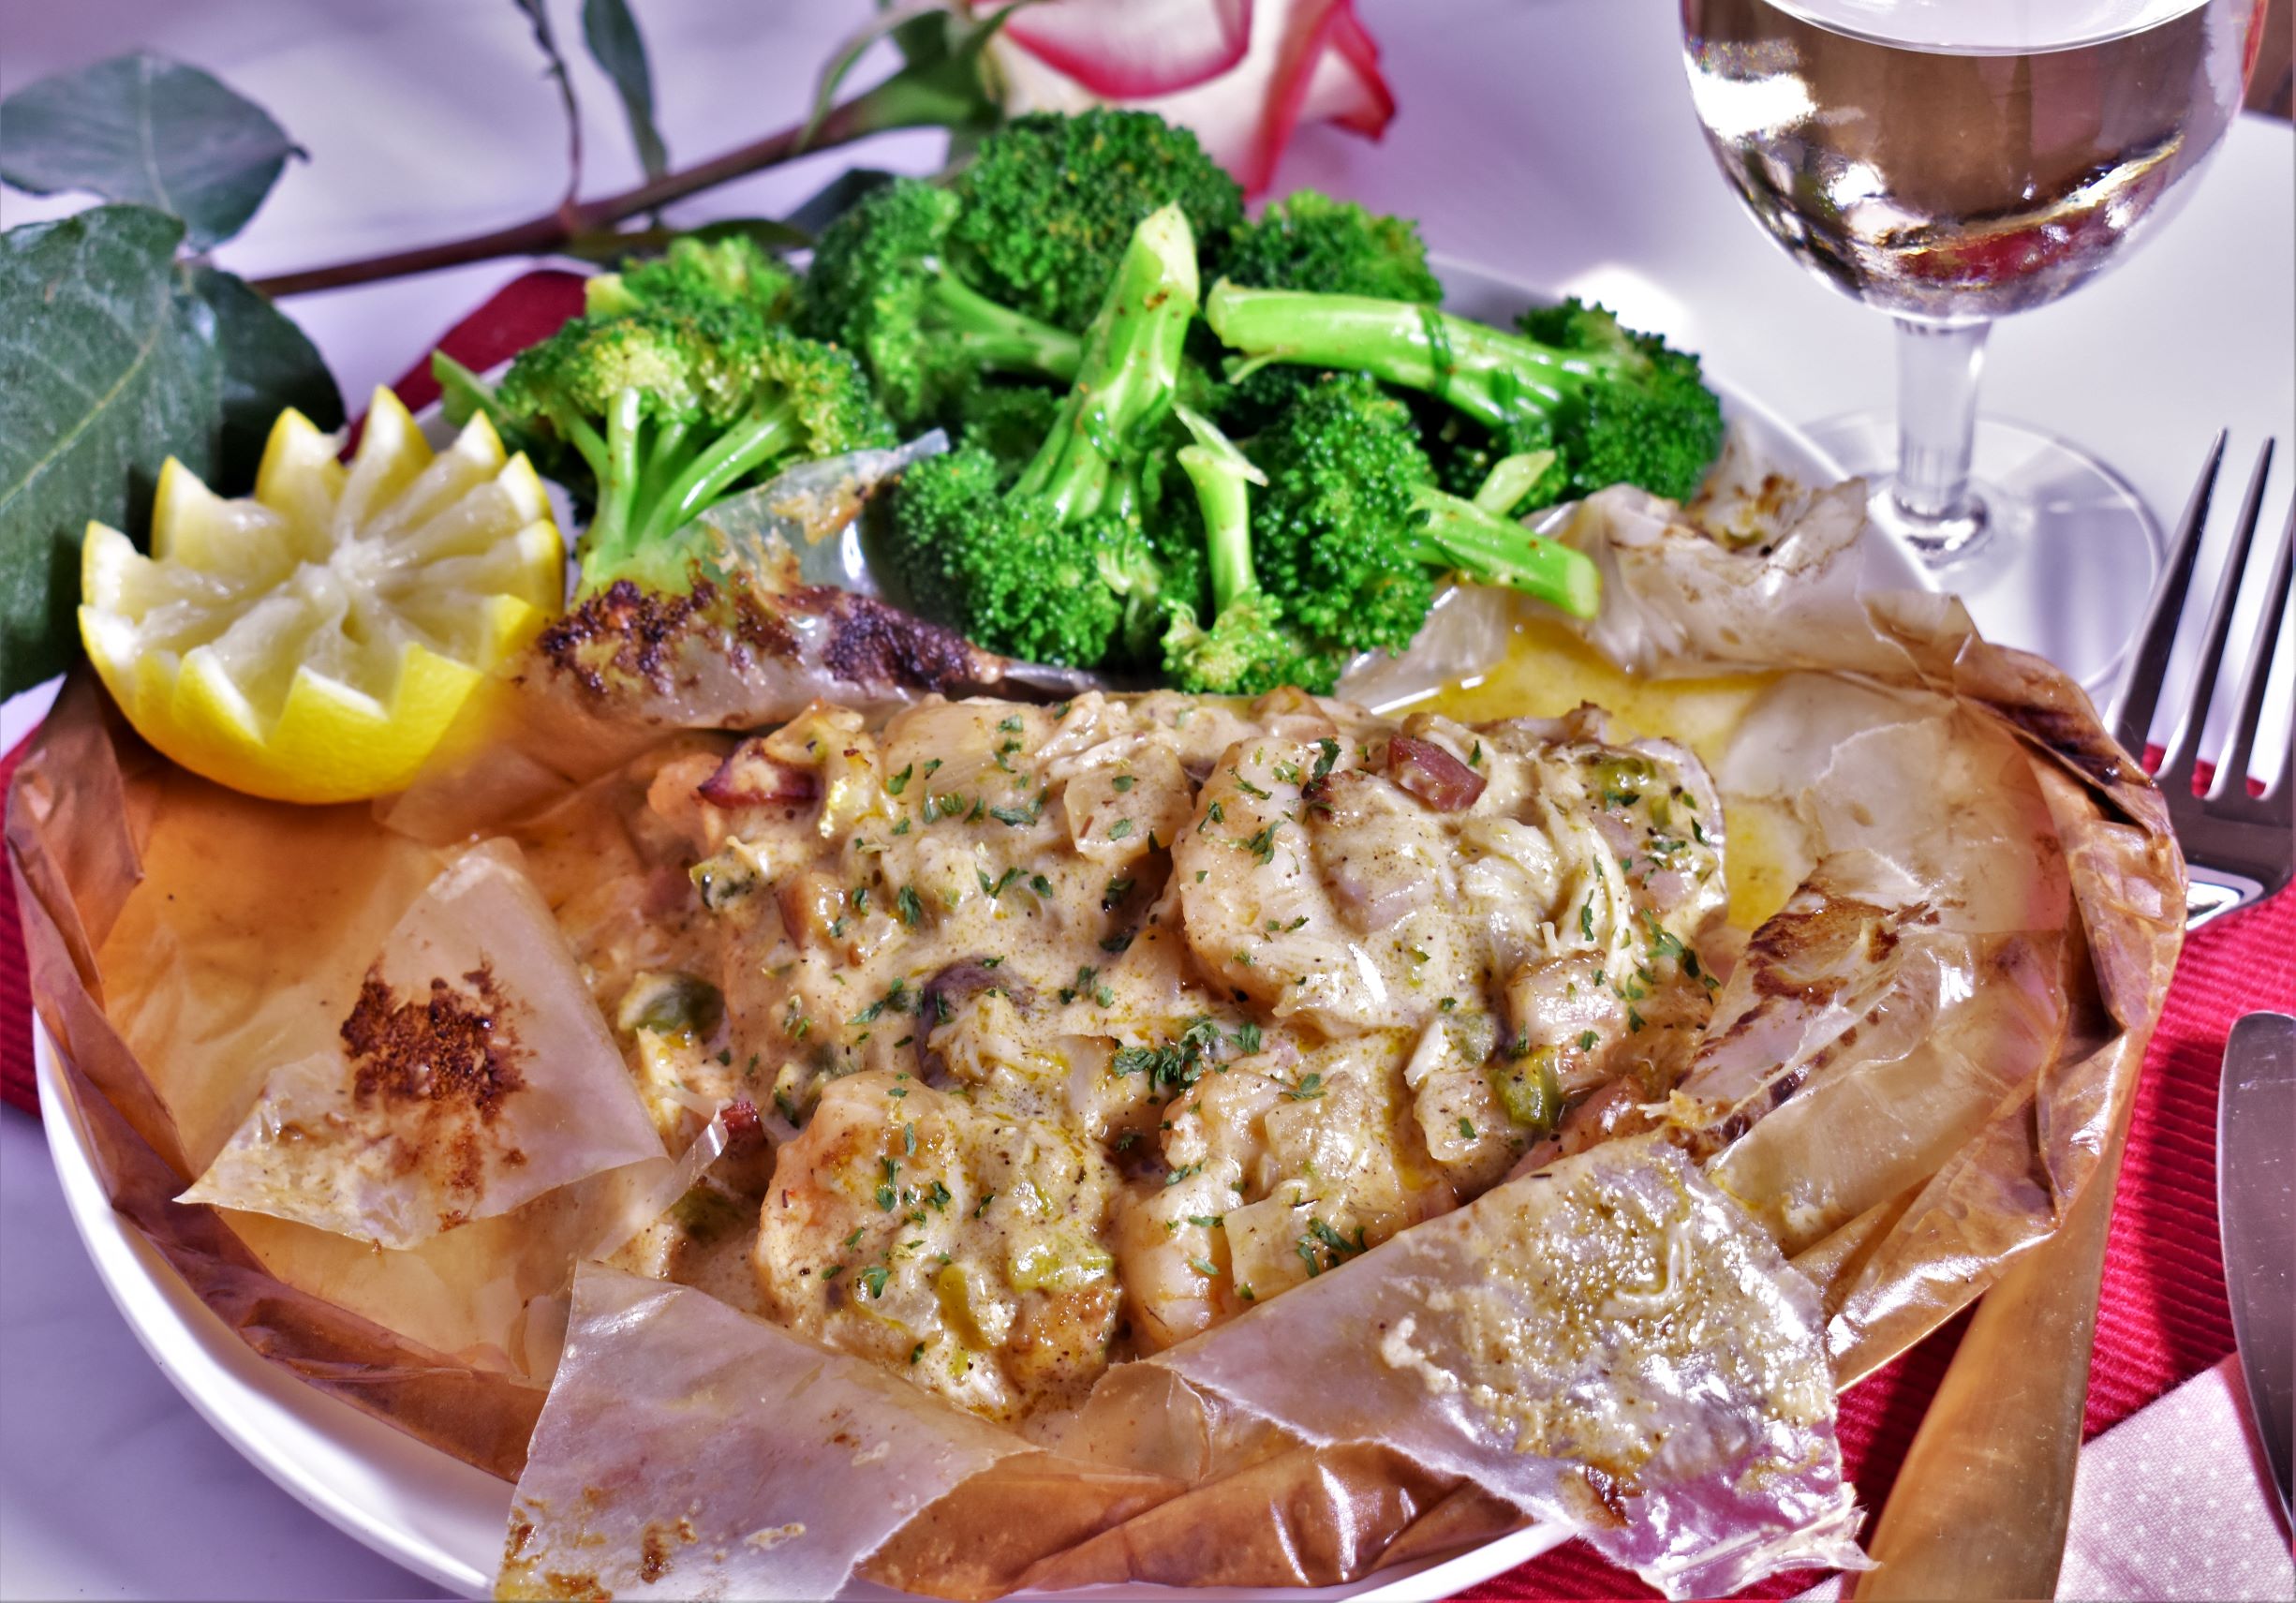 a plate of fish en papillote with a side of broccoli and a lemon slice for garnish